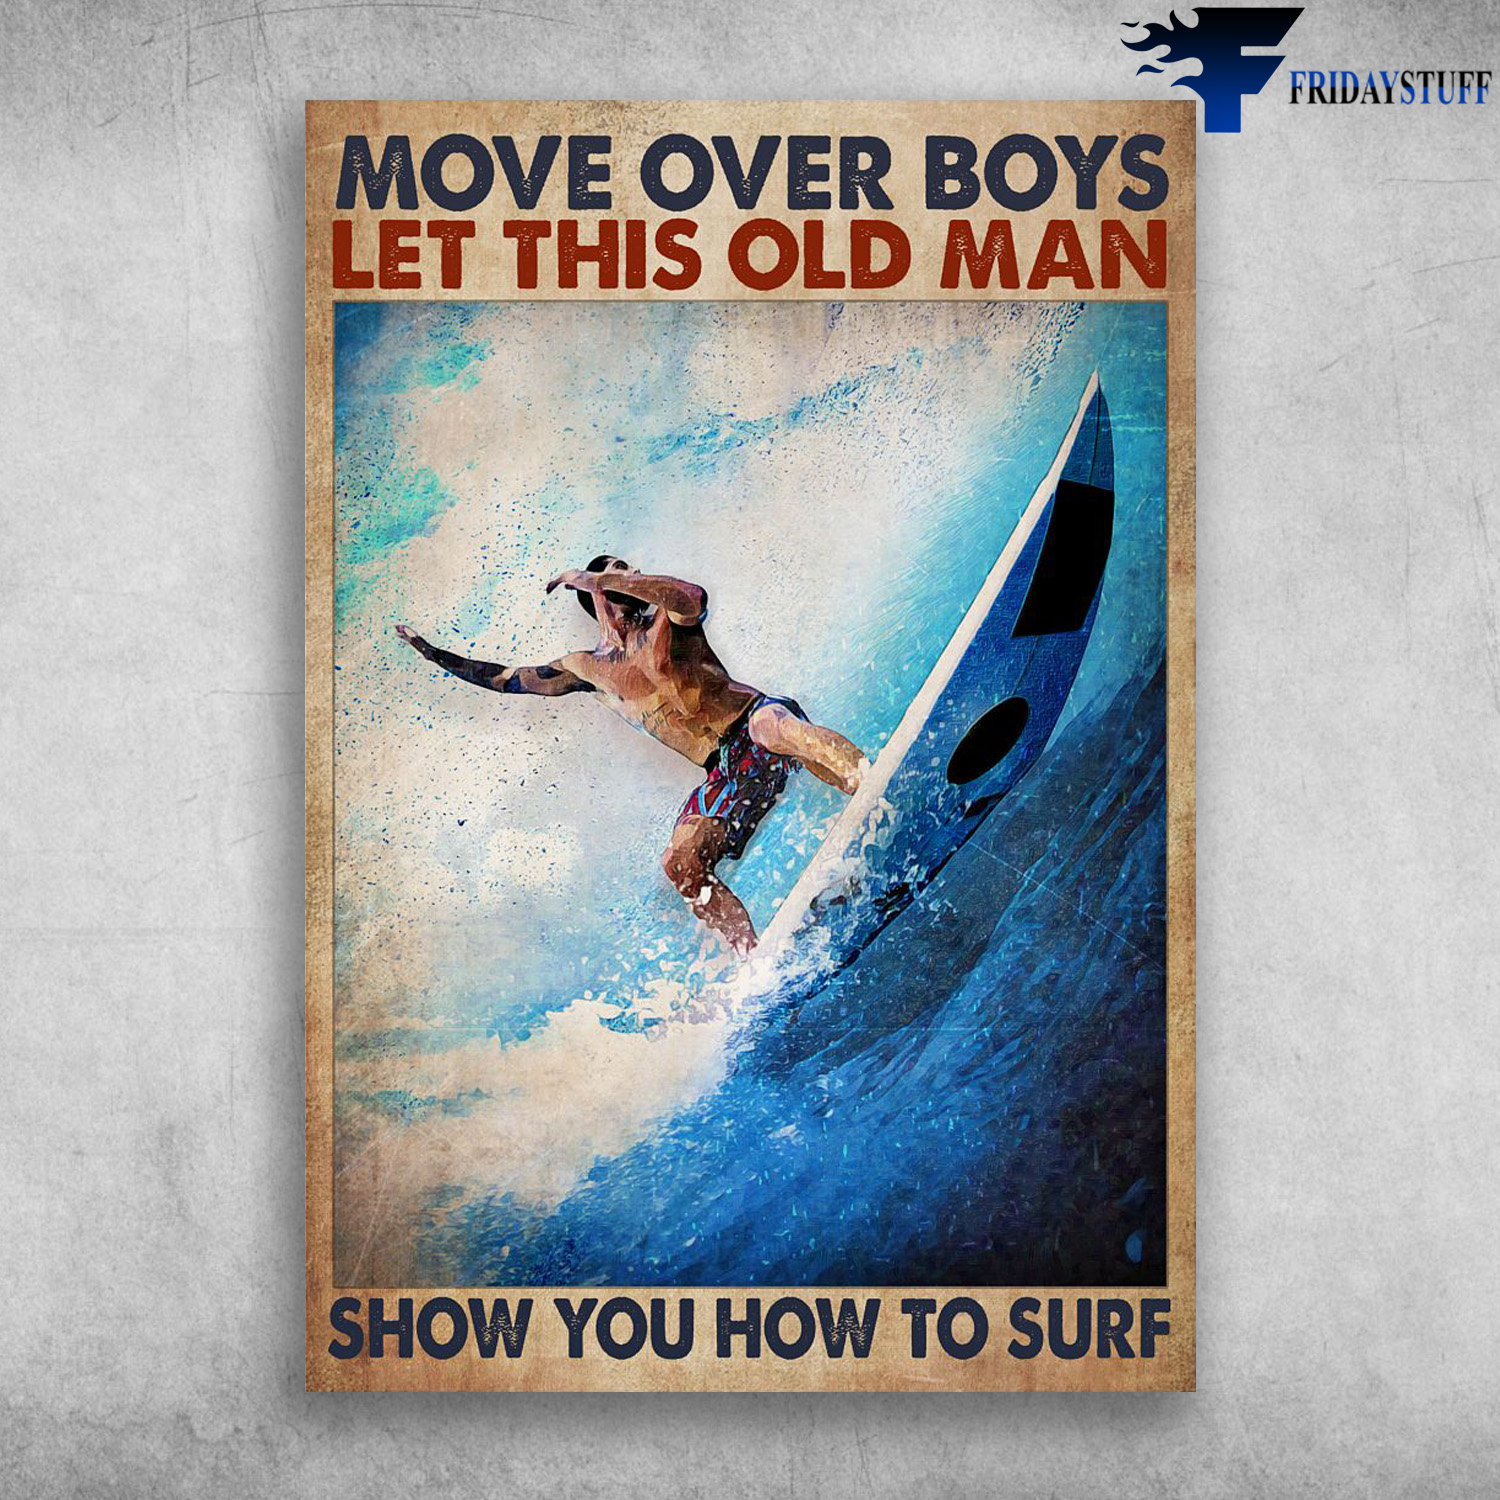 Surfing Man - Move Over Boys, Let This Old Man, Show You How To Surf